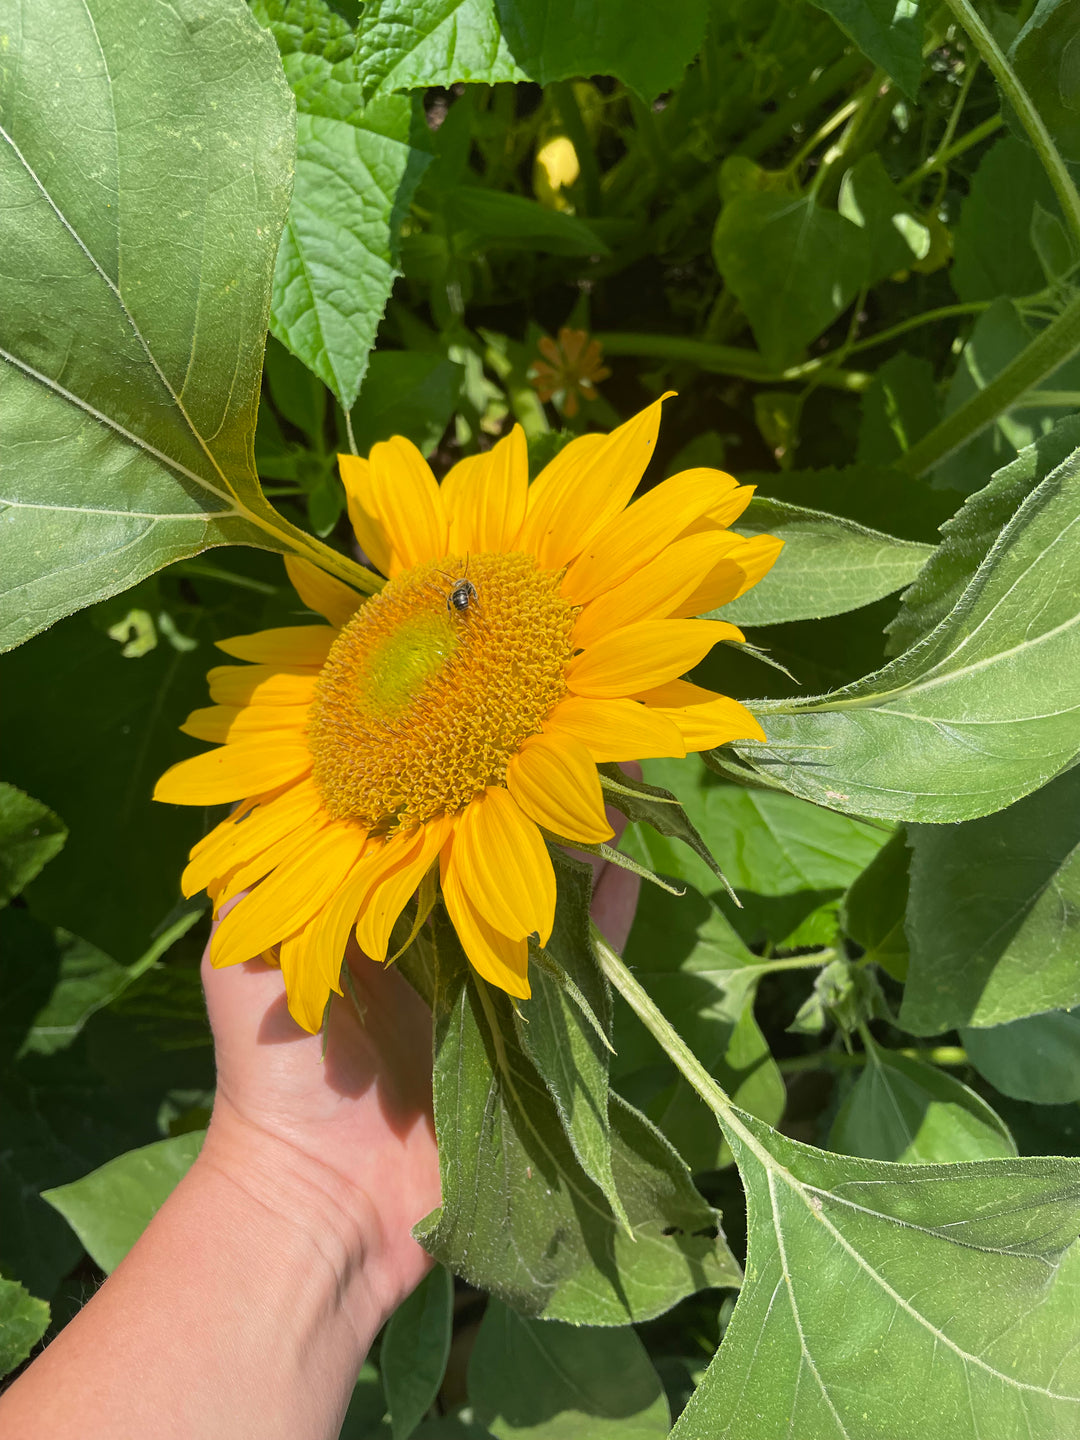 Plant Sunflowers all Summer!